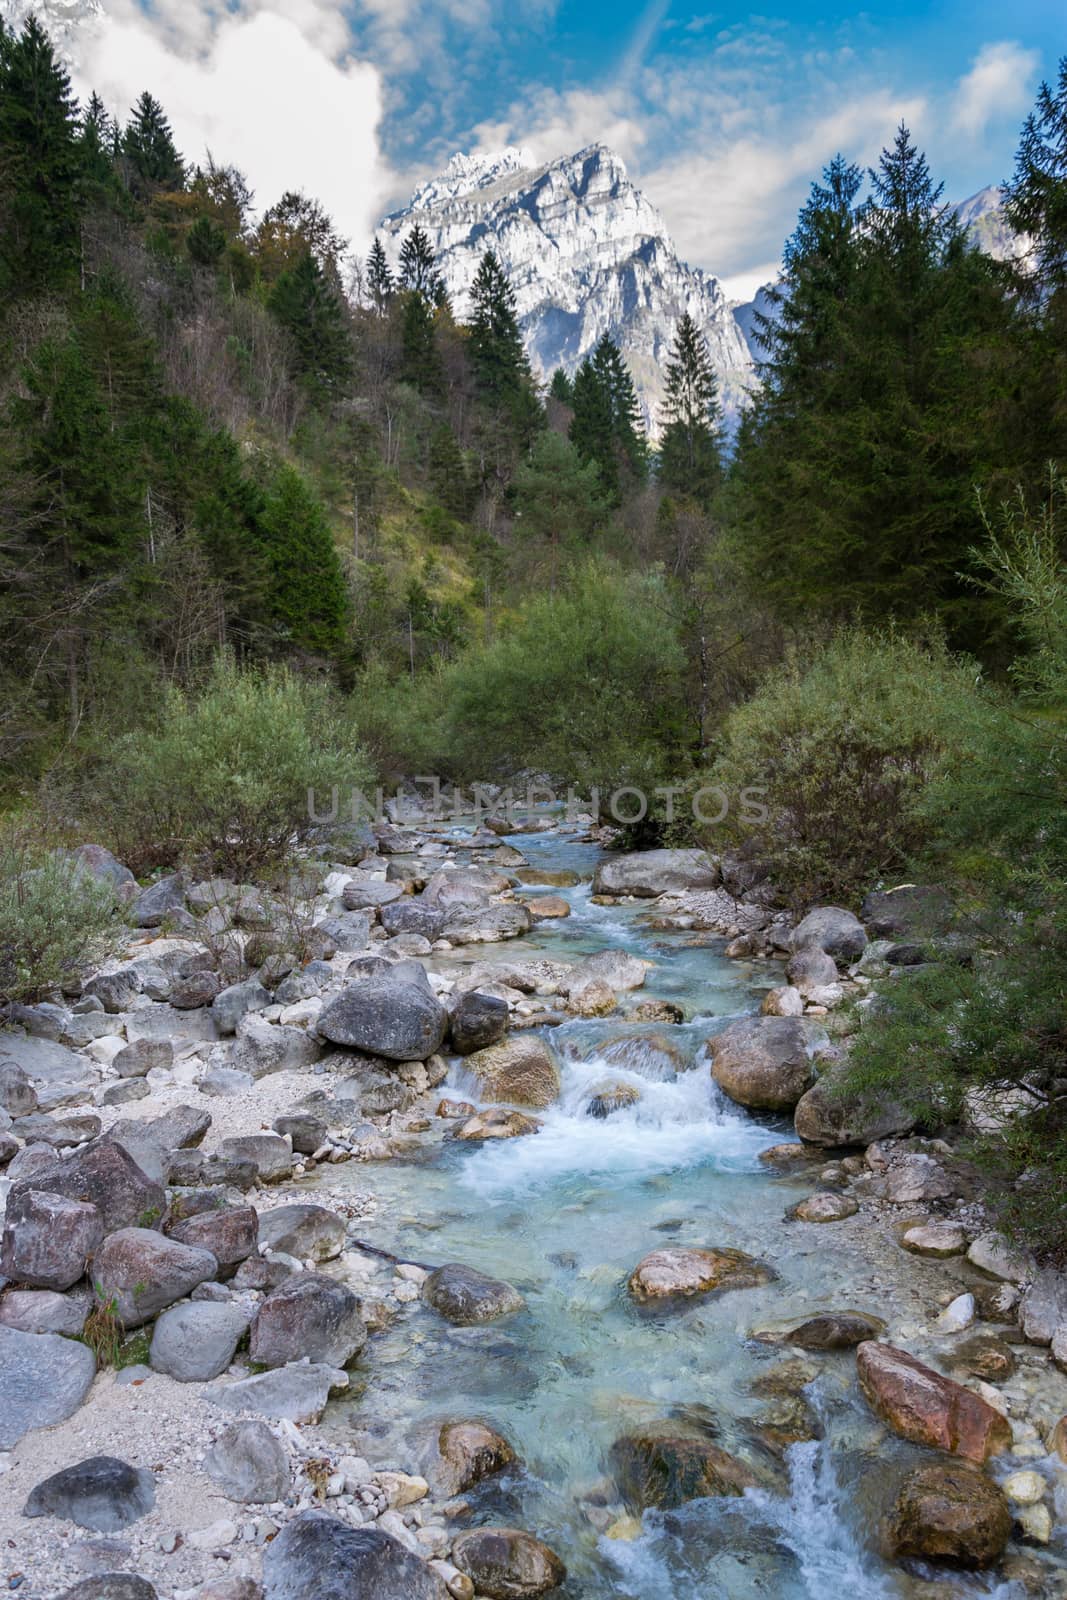 Alpine torrent with a mountain in the background by enrico.lapponi